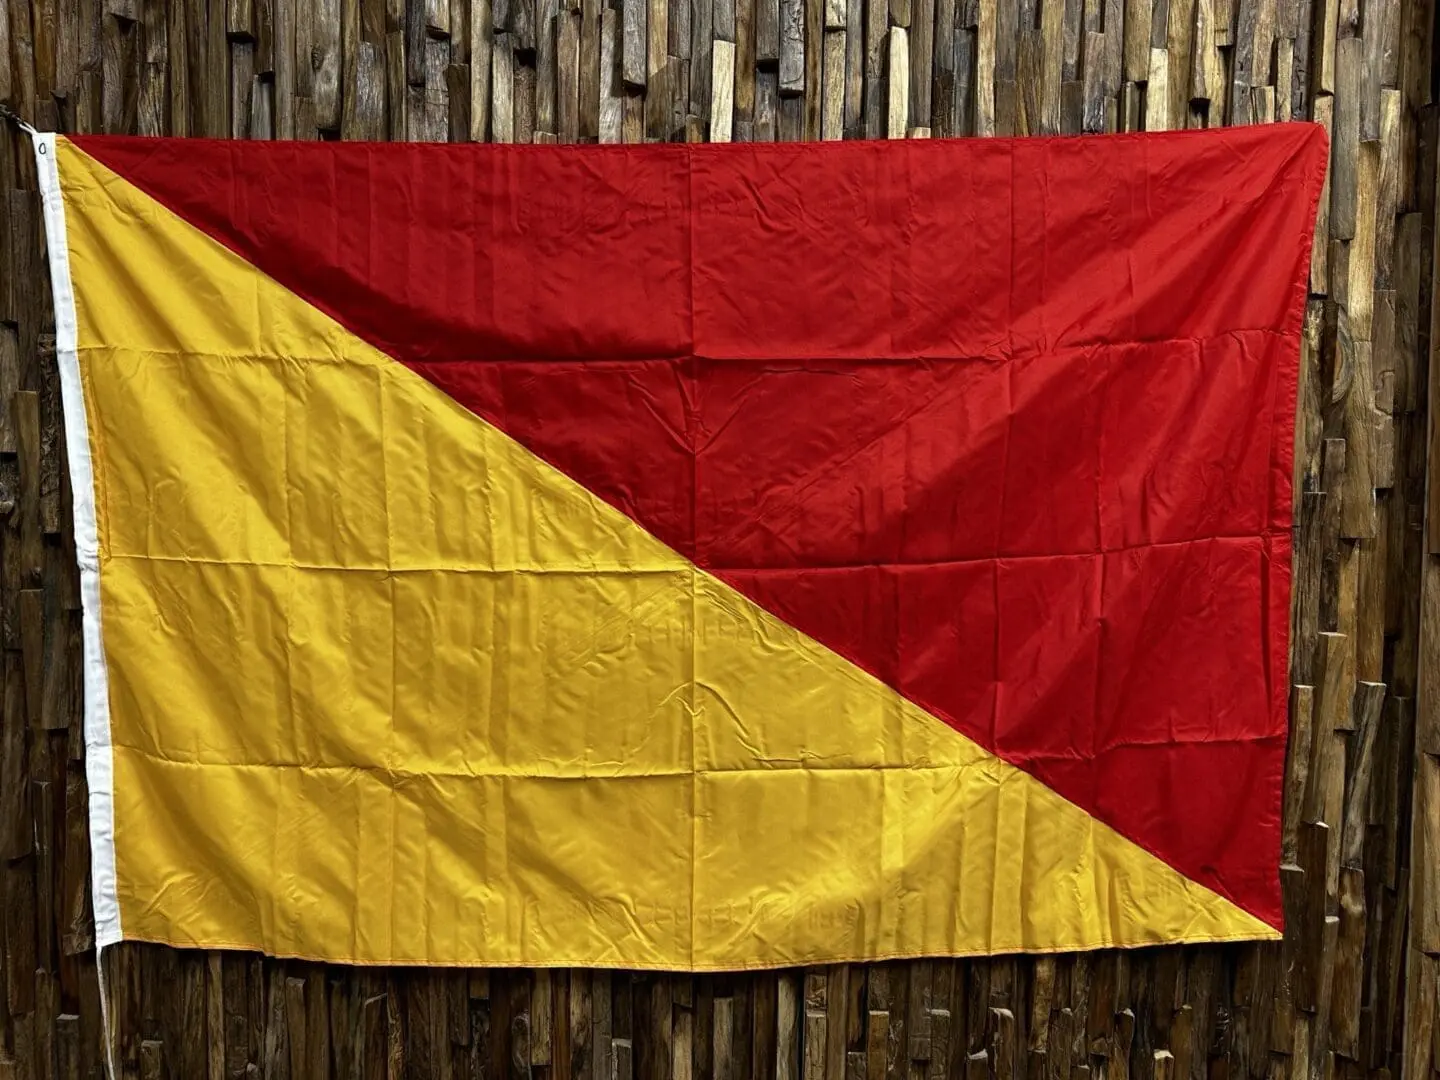 A red and yellow flag hanging on the side of a wooden wall.